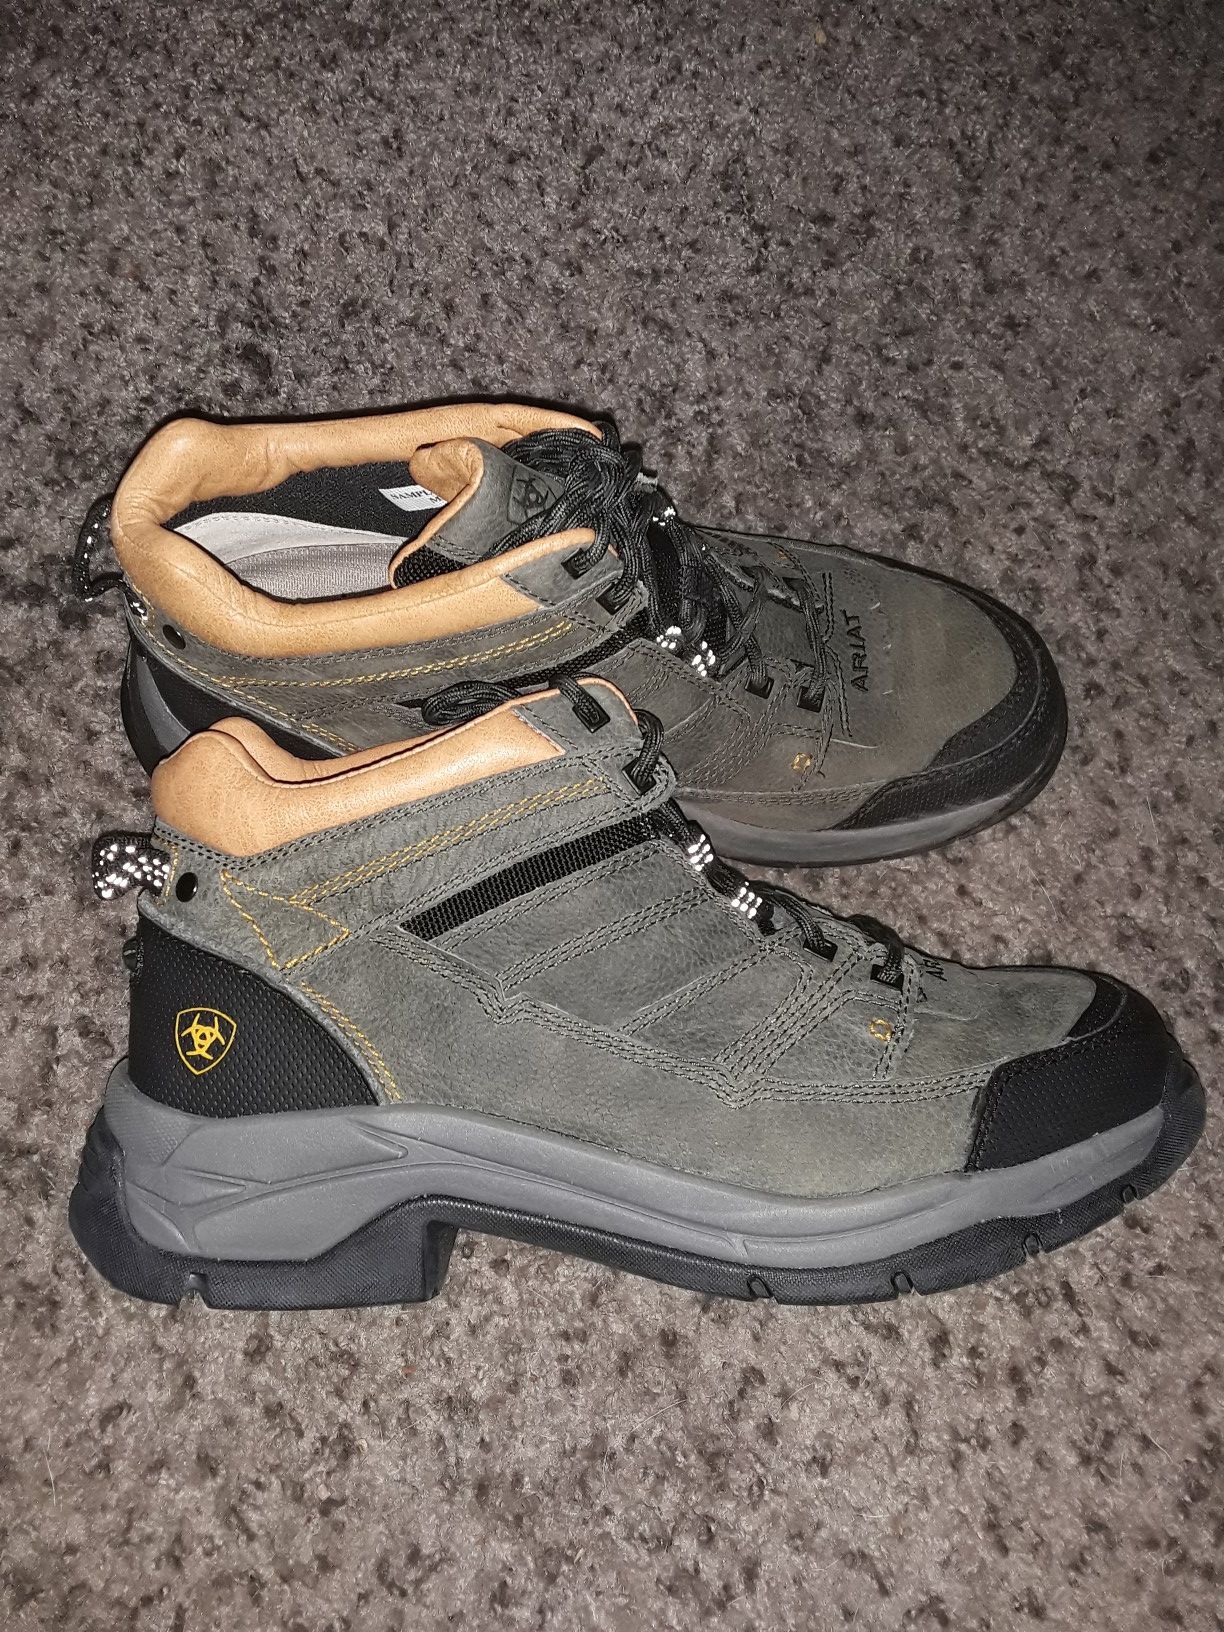 Brand New Mens Hiking Work boots Botas ARIAT Size 10